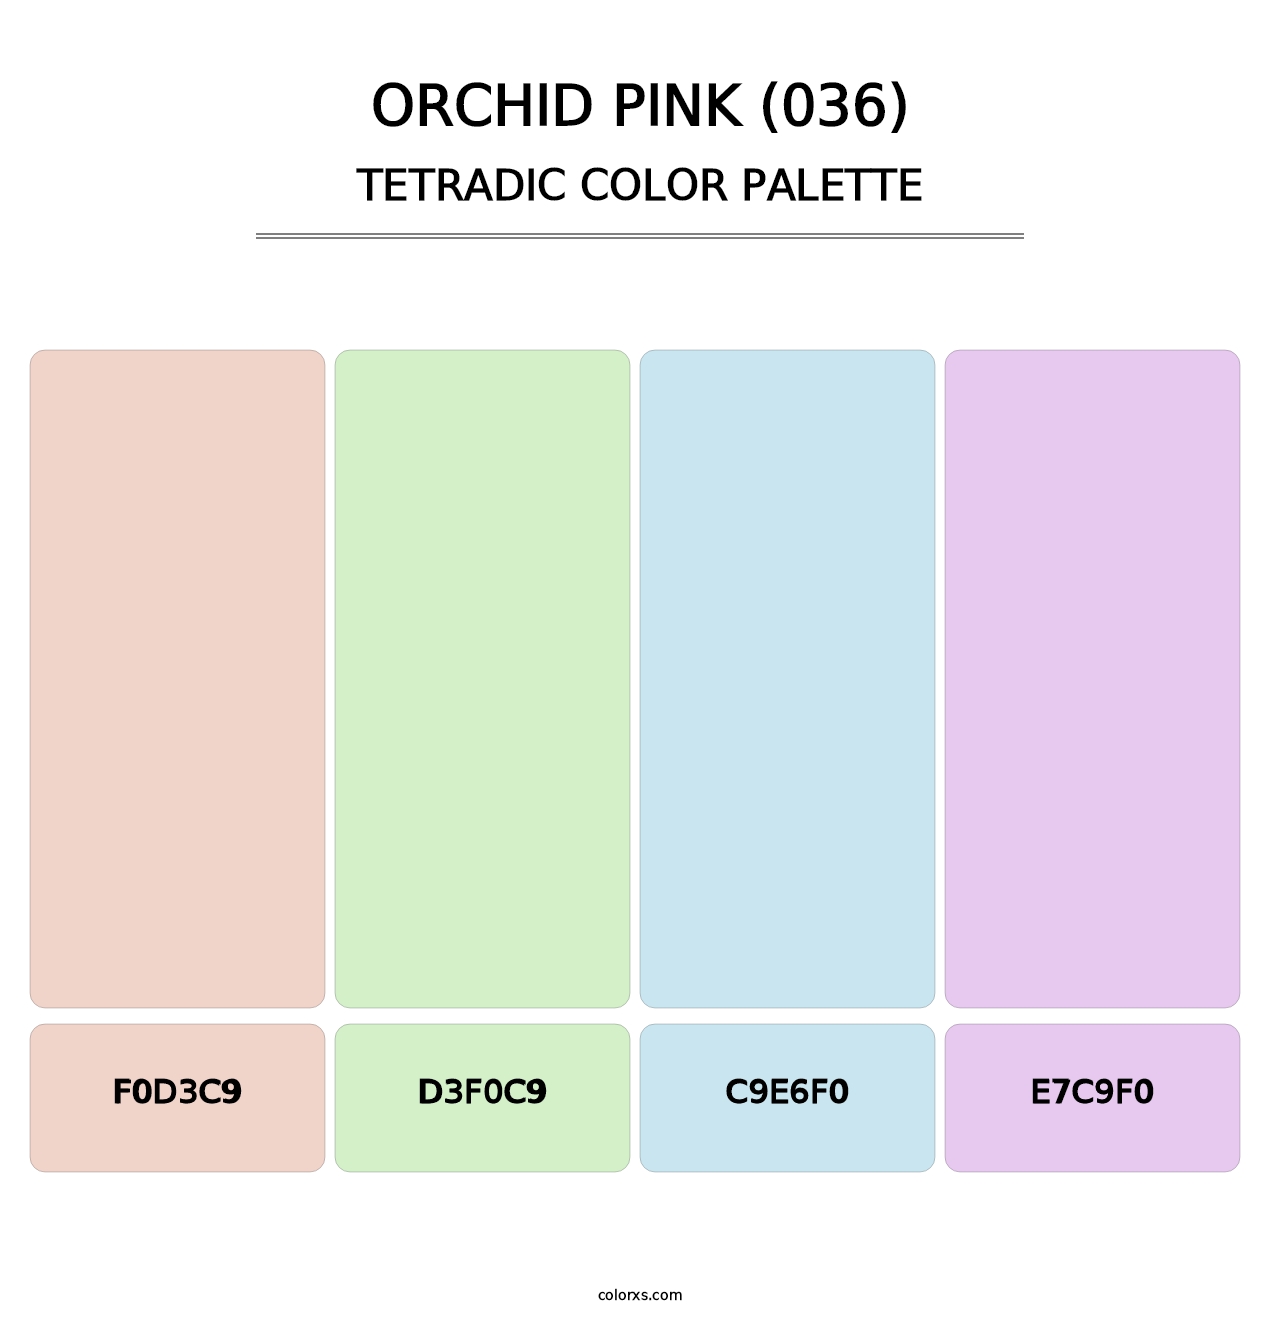 Orchid Pink (036) - Tetradic Color Palette